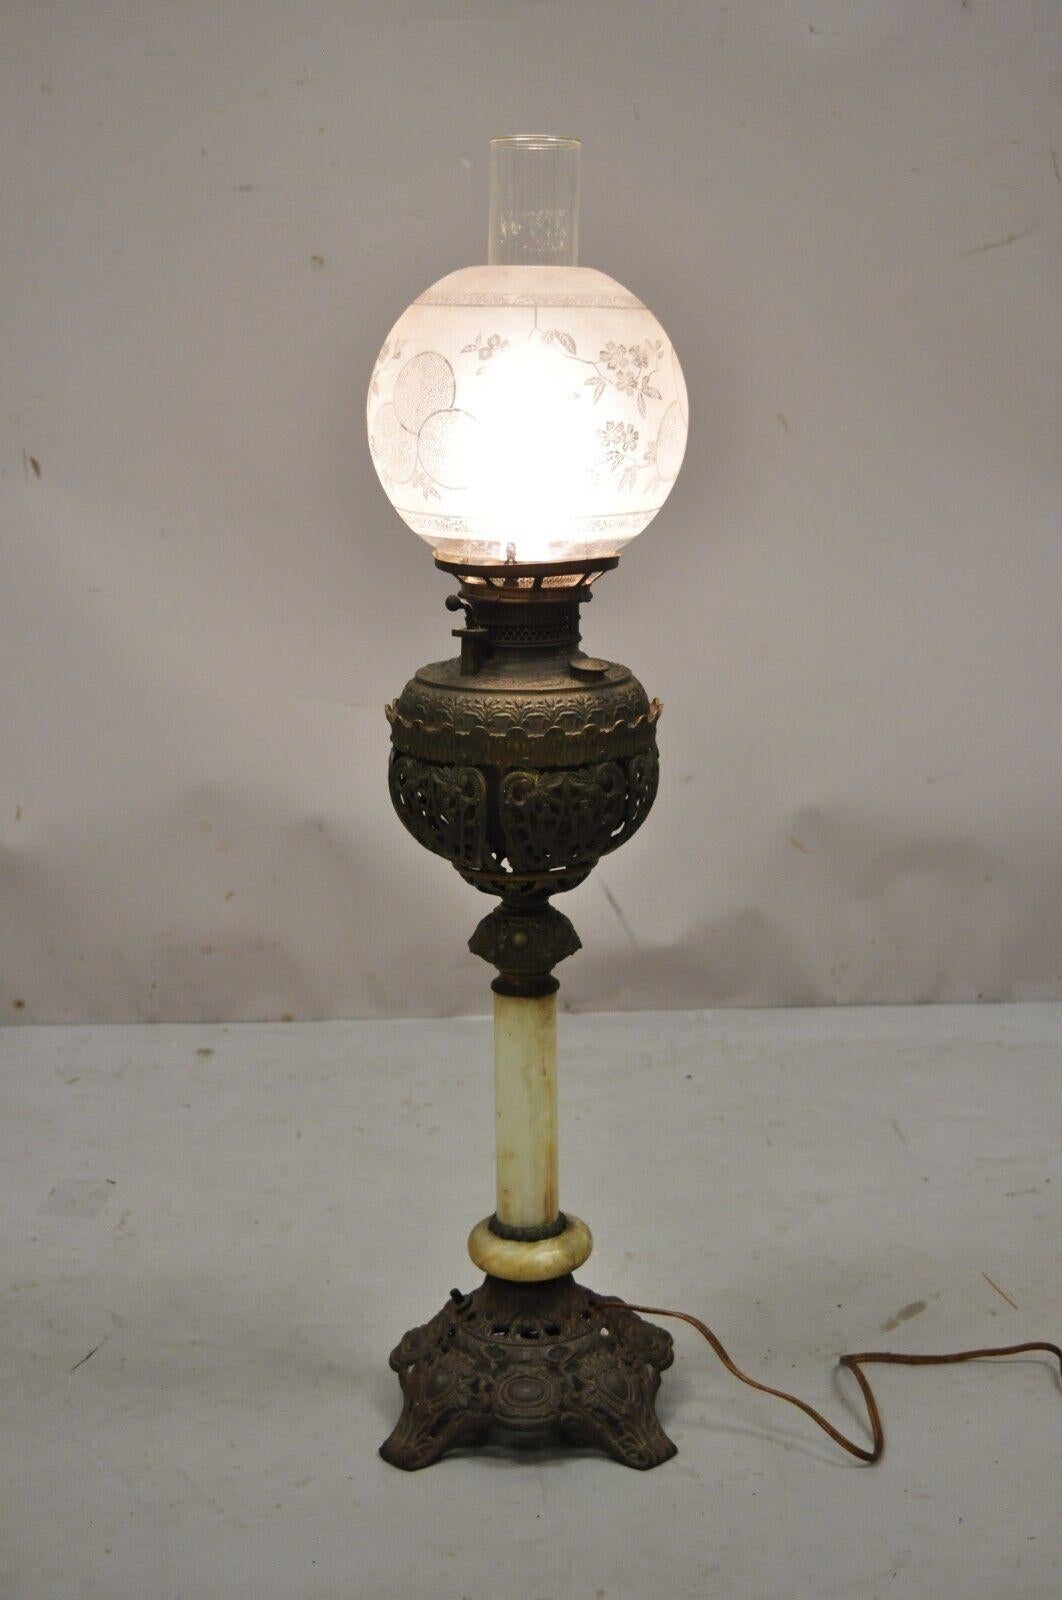 Antique Victorian Bronze Converted Oil Lamp Table Lamp Alabaster Shaft. item features alabaster shaft, pierce decorated bronze, glass shade with floral decoration and glass chute, very nice antique item. Circa 19ème siècle. Dimensions : 31